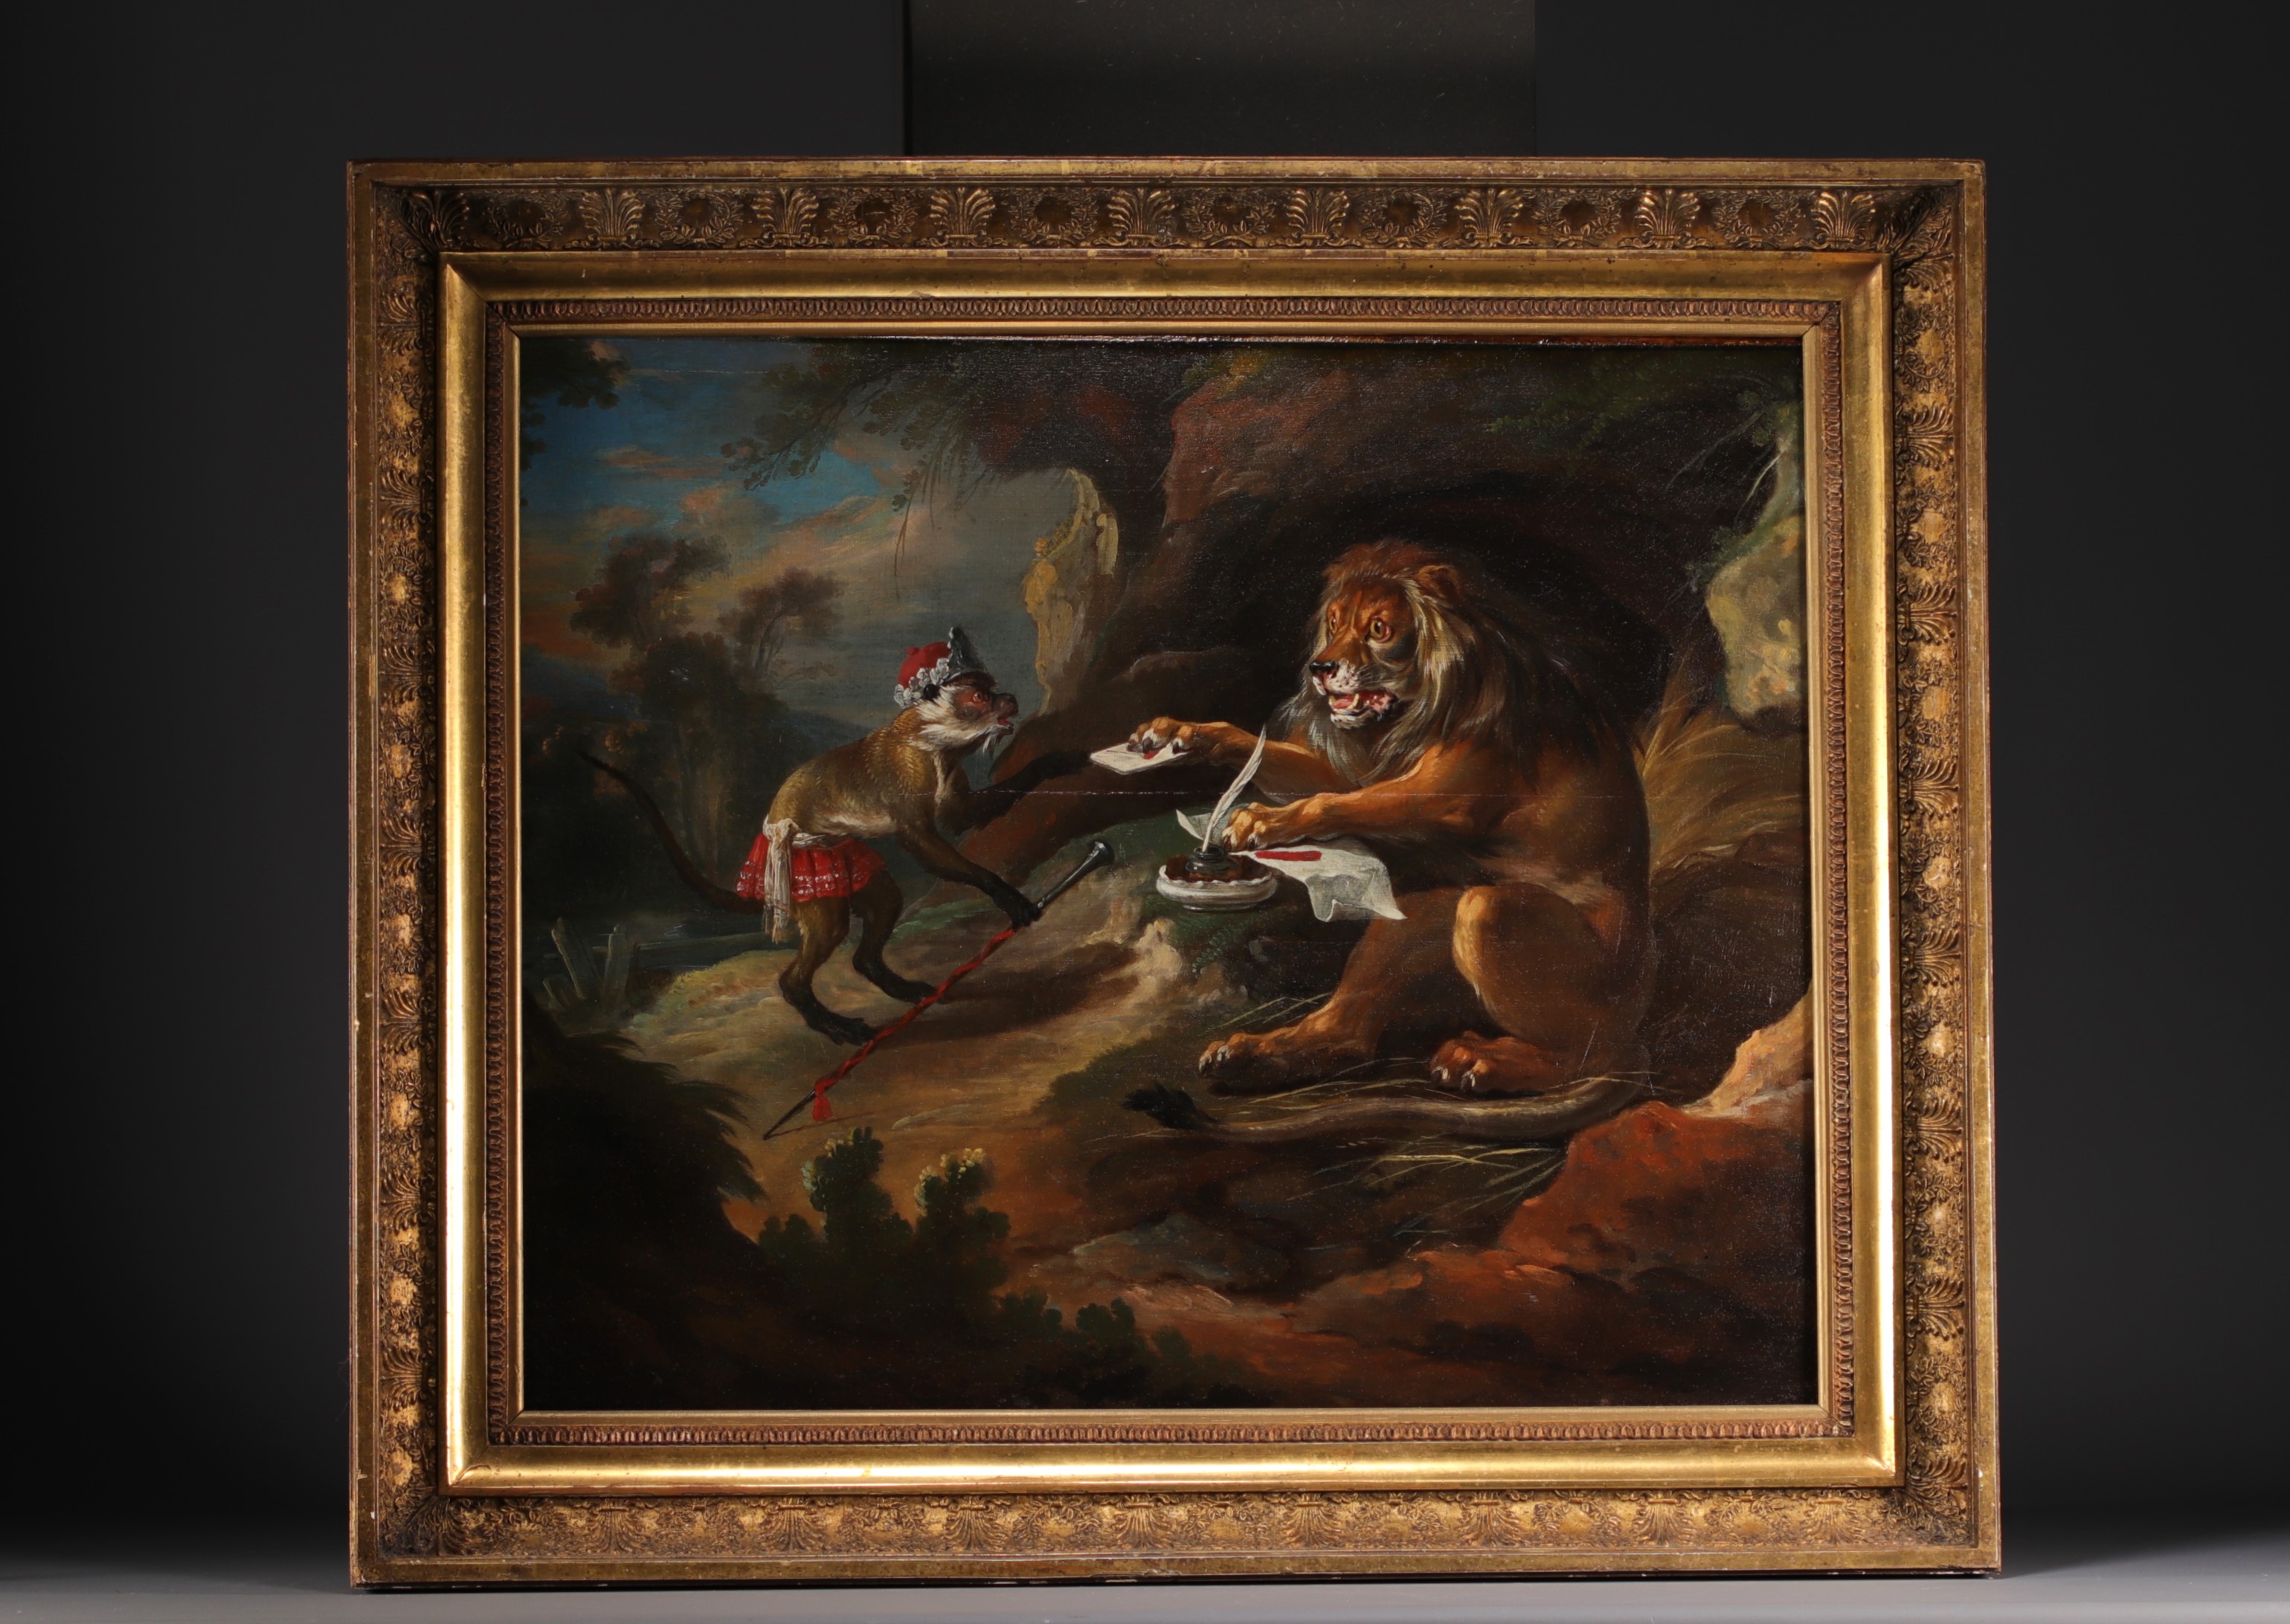 David TENIERS LE JEUNE (1610-1690) Entourage of "The Lion and the Monkey" Oil on panel, 17th century - Image 2 of 2